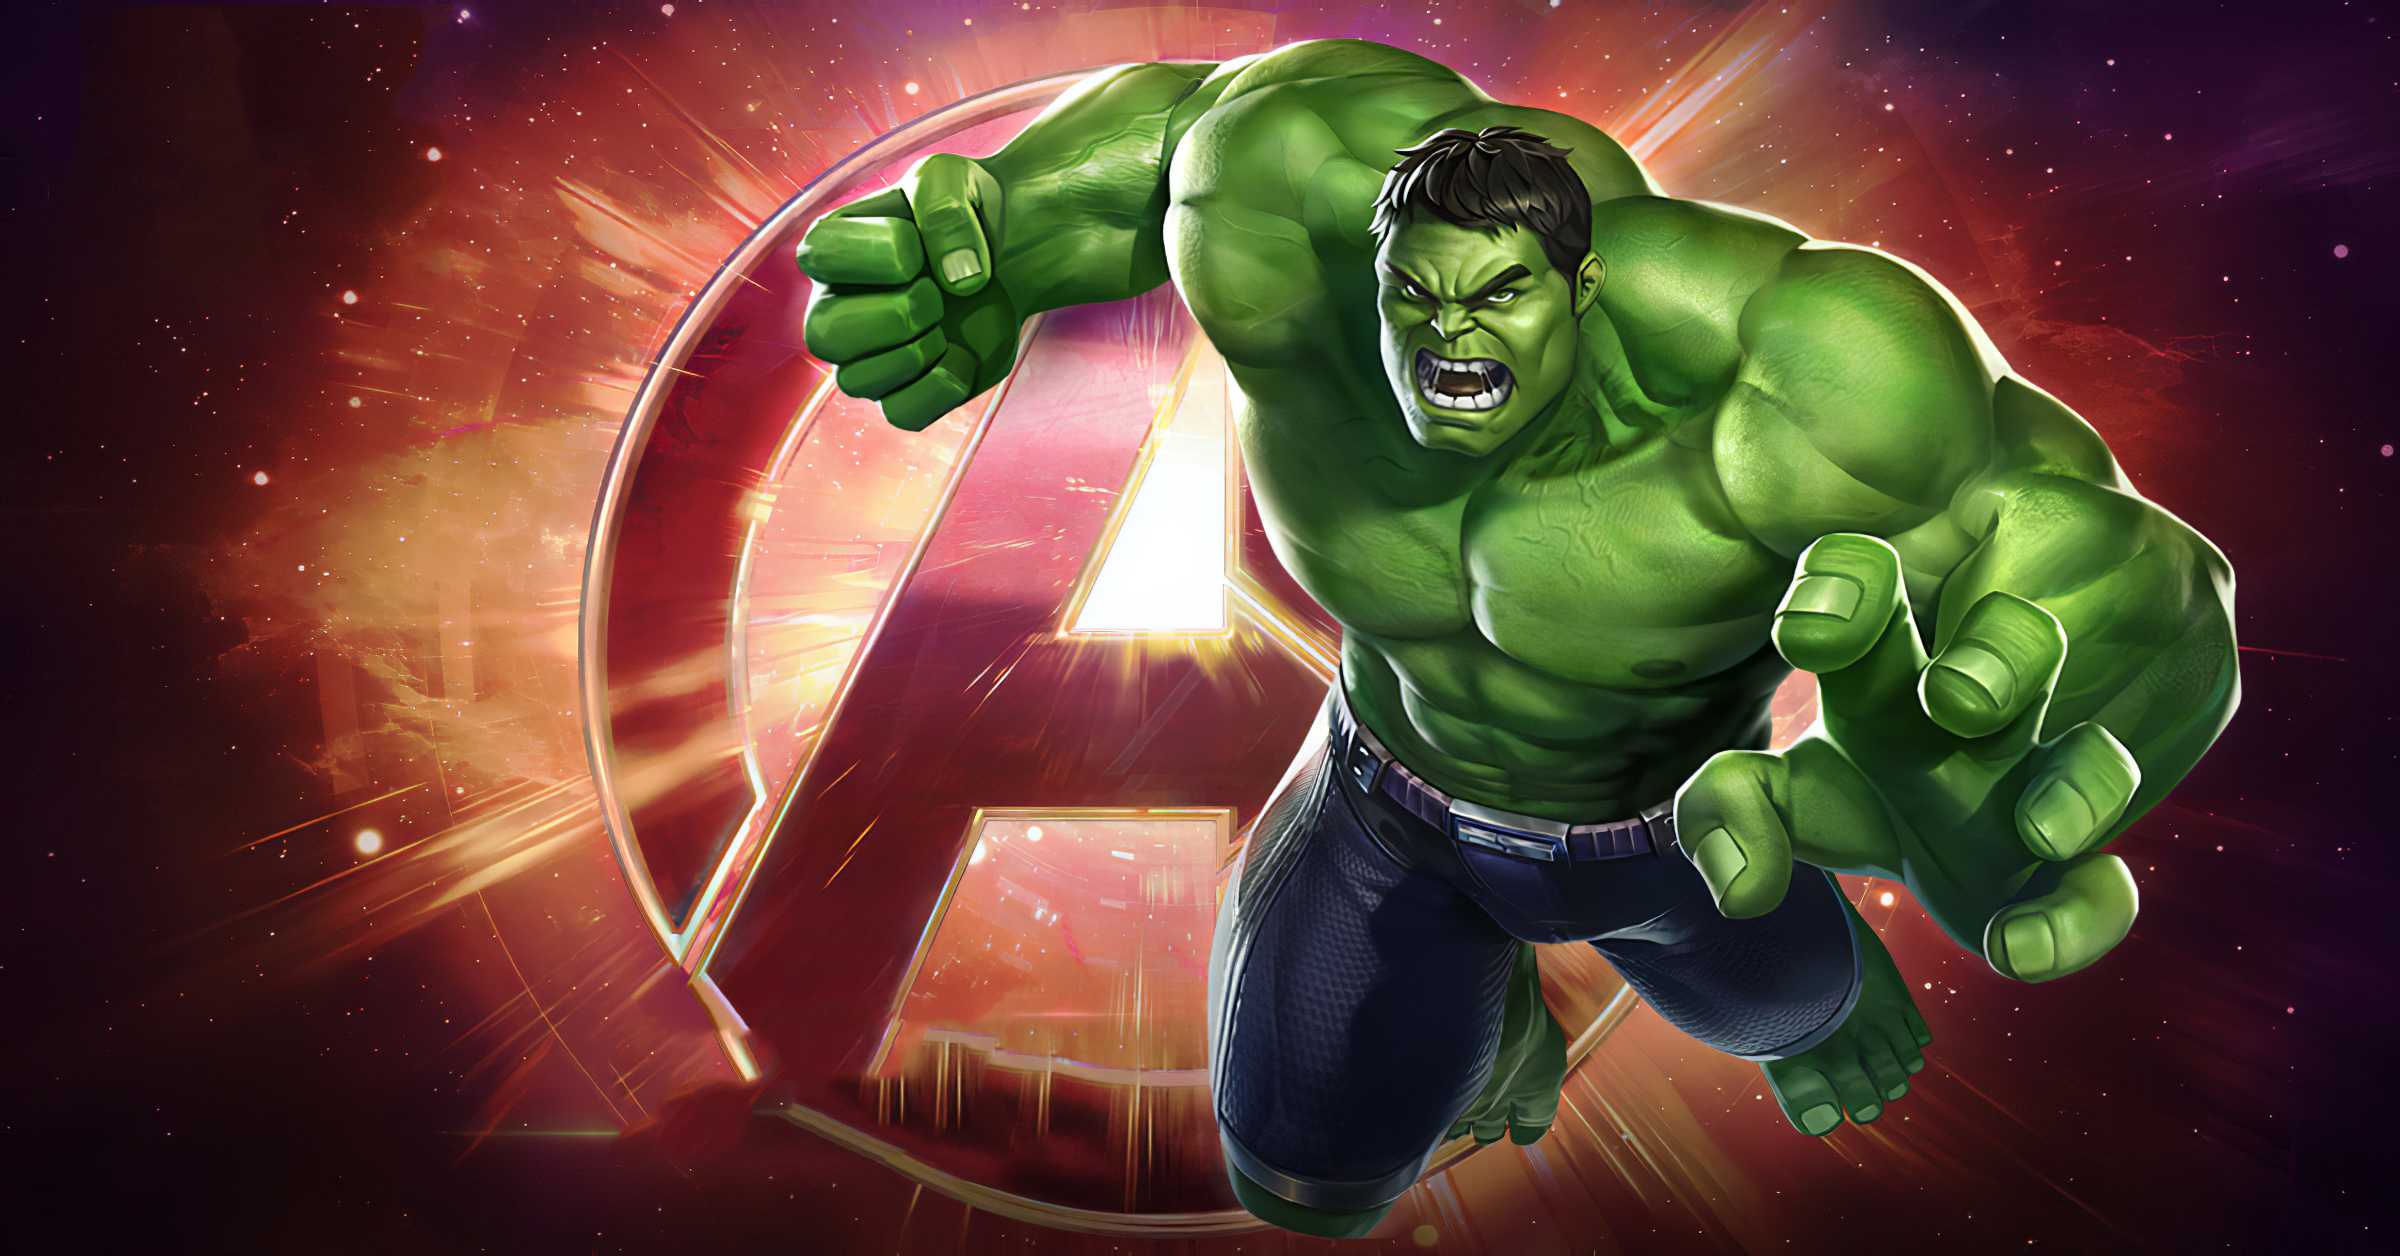 800x1280 Avengers Hulk Game Nexus 7,Samsung Galaxy Tab 10,Note Android  Tablets Wallpaper, HD Games 4K Wallpapers, Images, Photos and Background -  Wallpapers Den